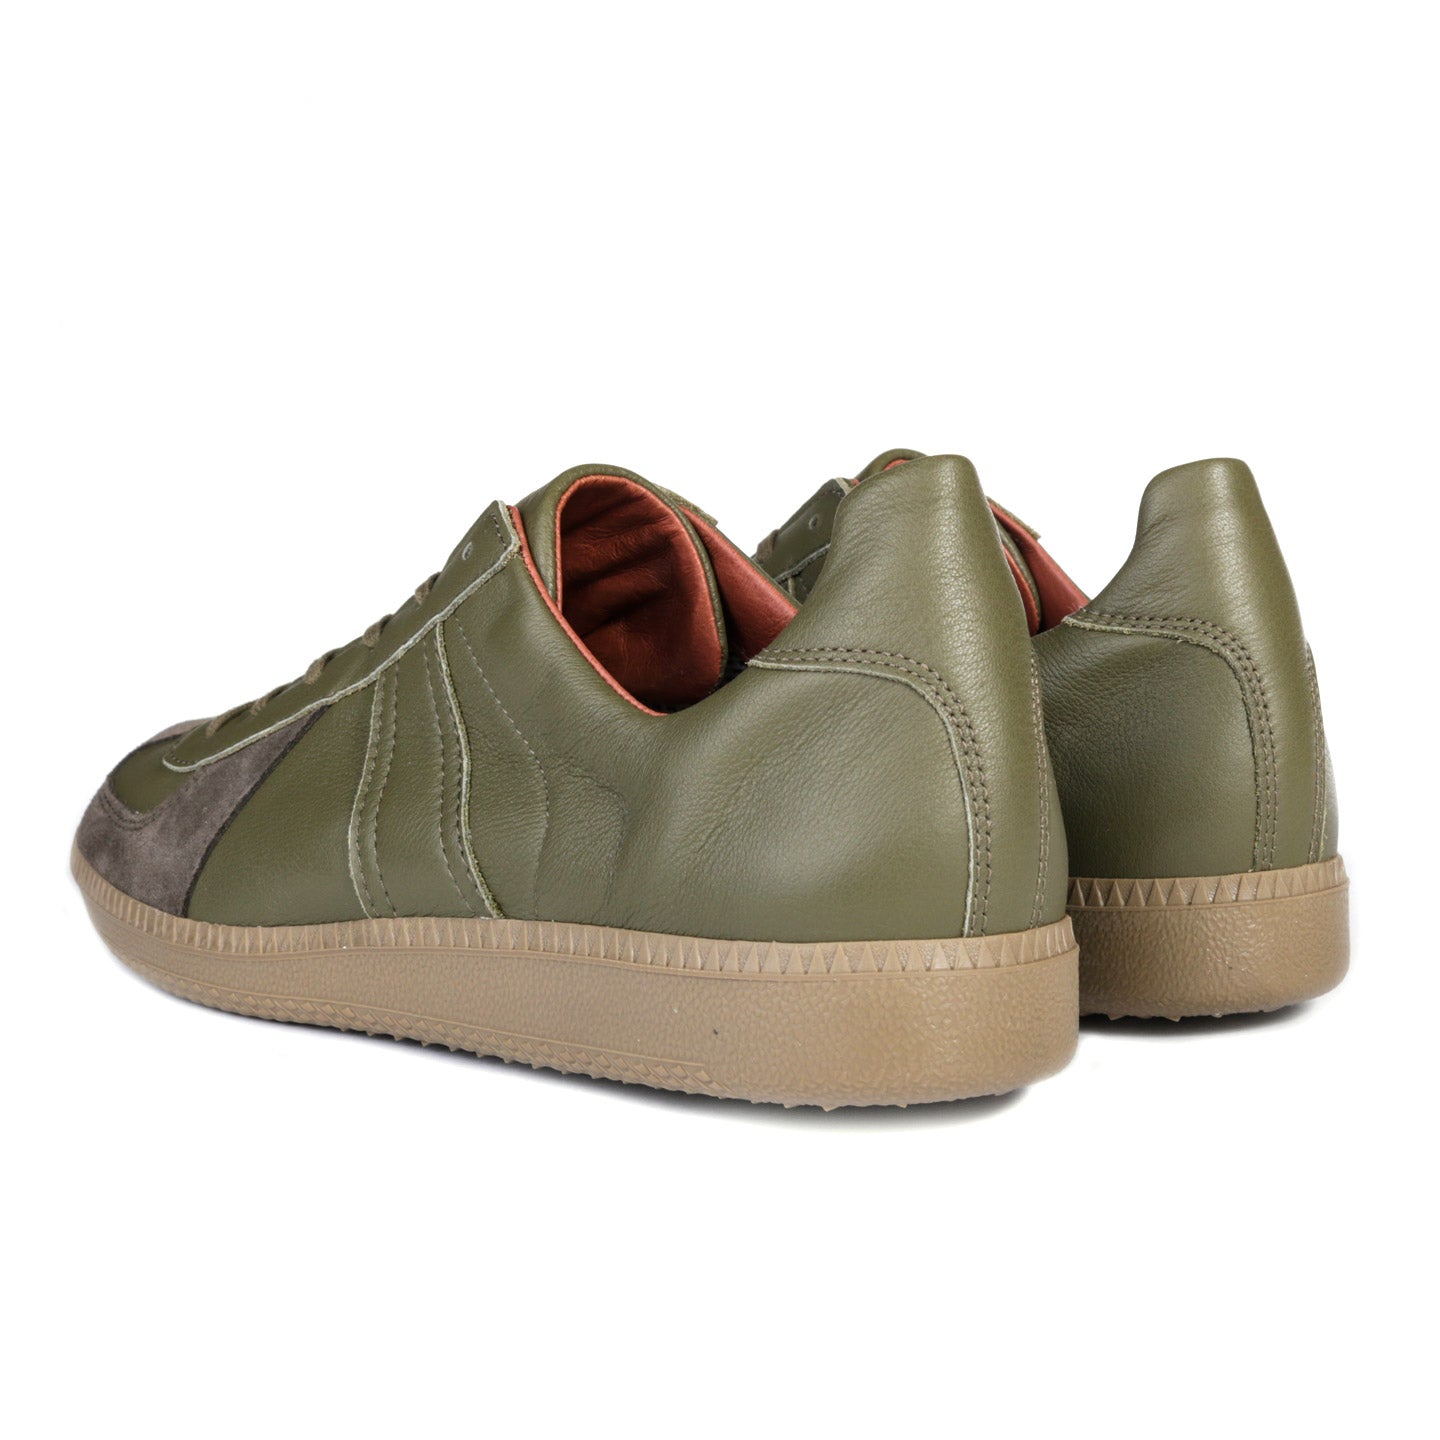 REPRODUCTION OF FOUND GERMAN MILITARY TRAINER KHAKI